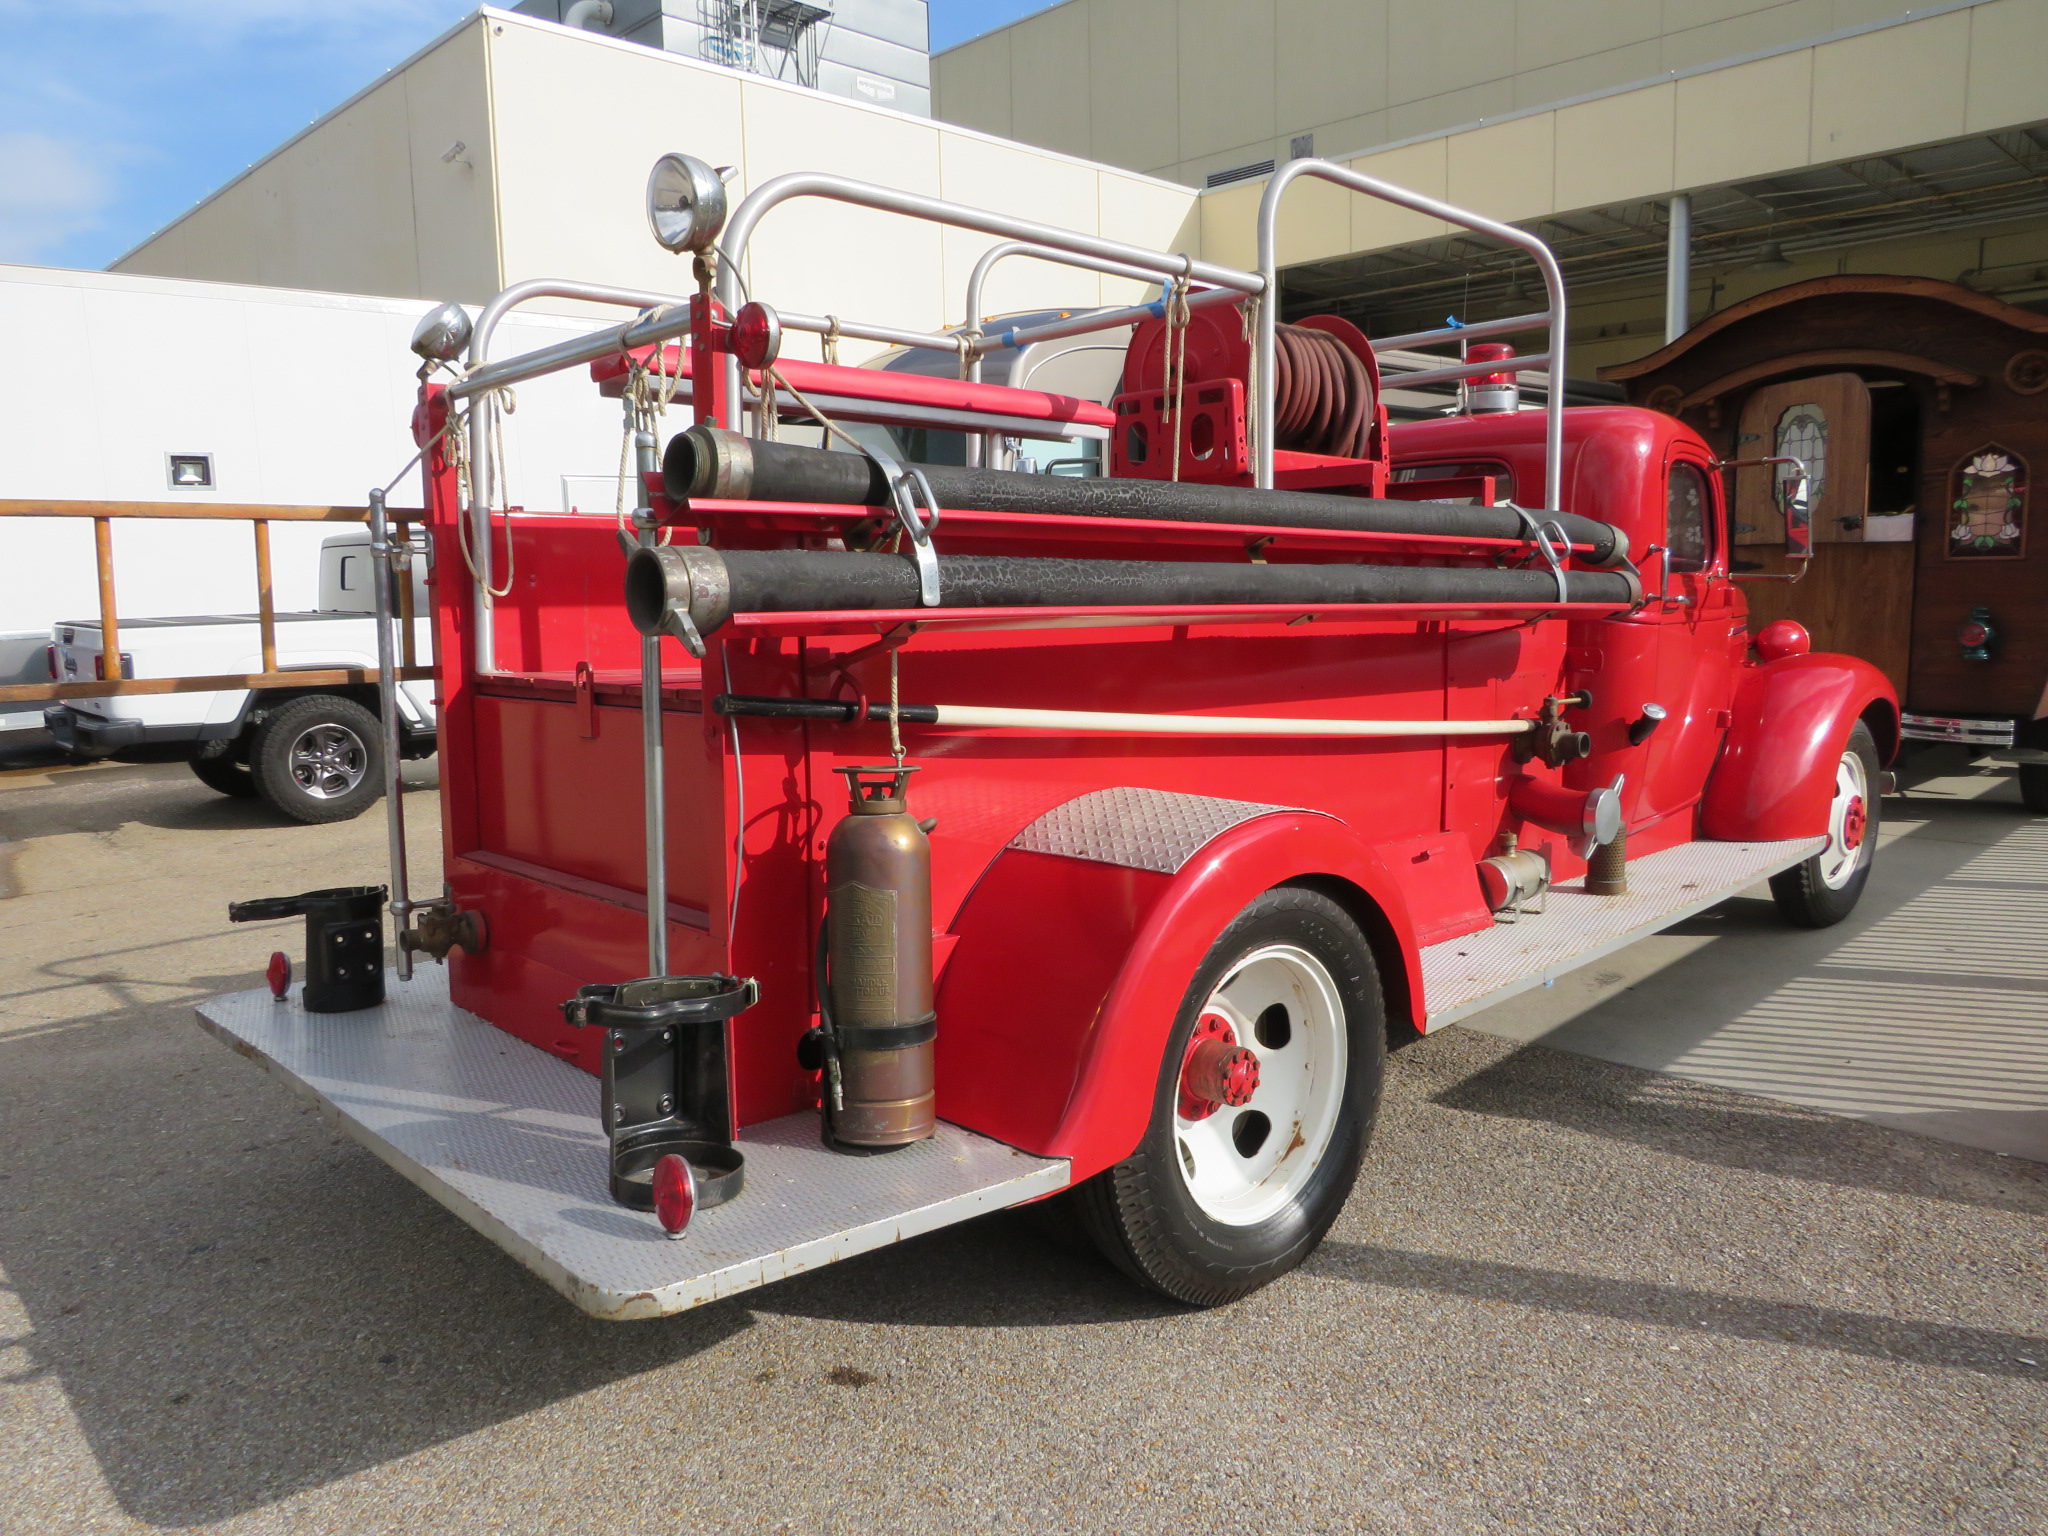 5th Image of a 1941 CHEVROLET FIRE TRUCK